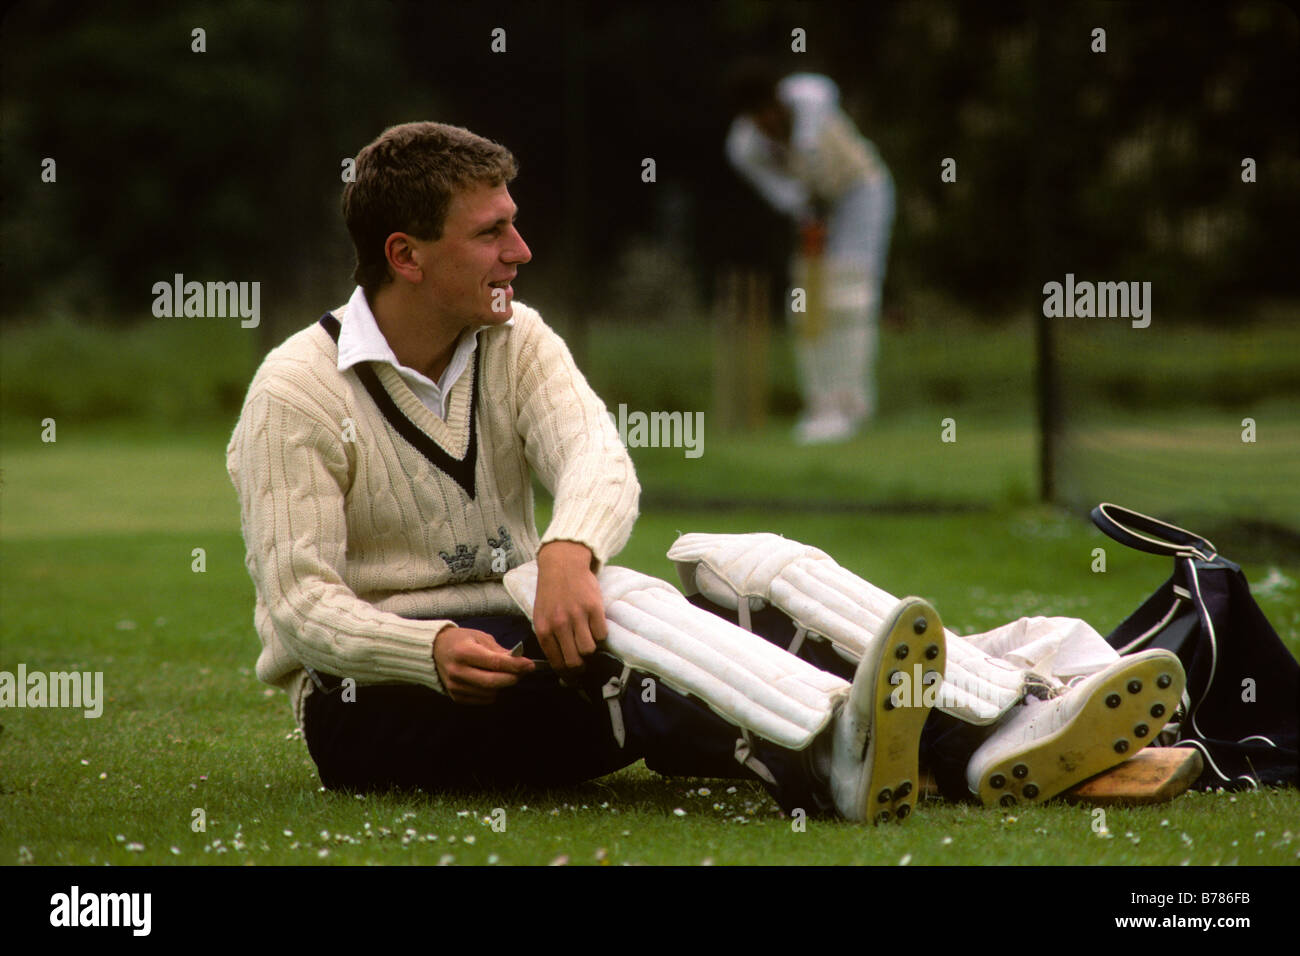 'Oxford, UK. Oxford University student puts on cricket pads as he prepares to play for his university team.' Stock Photo